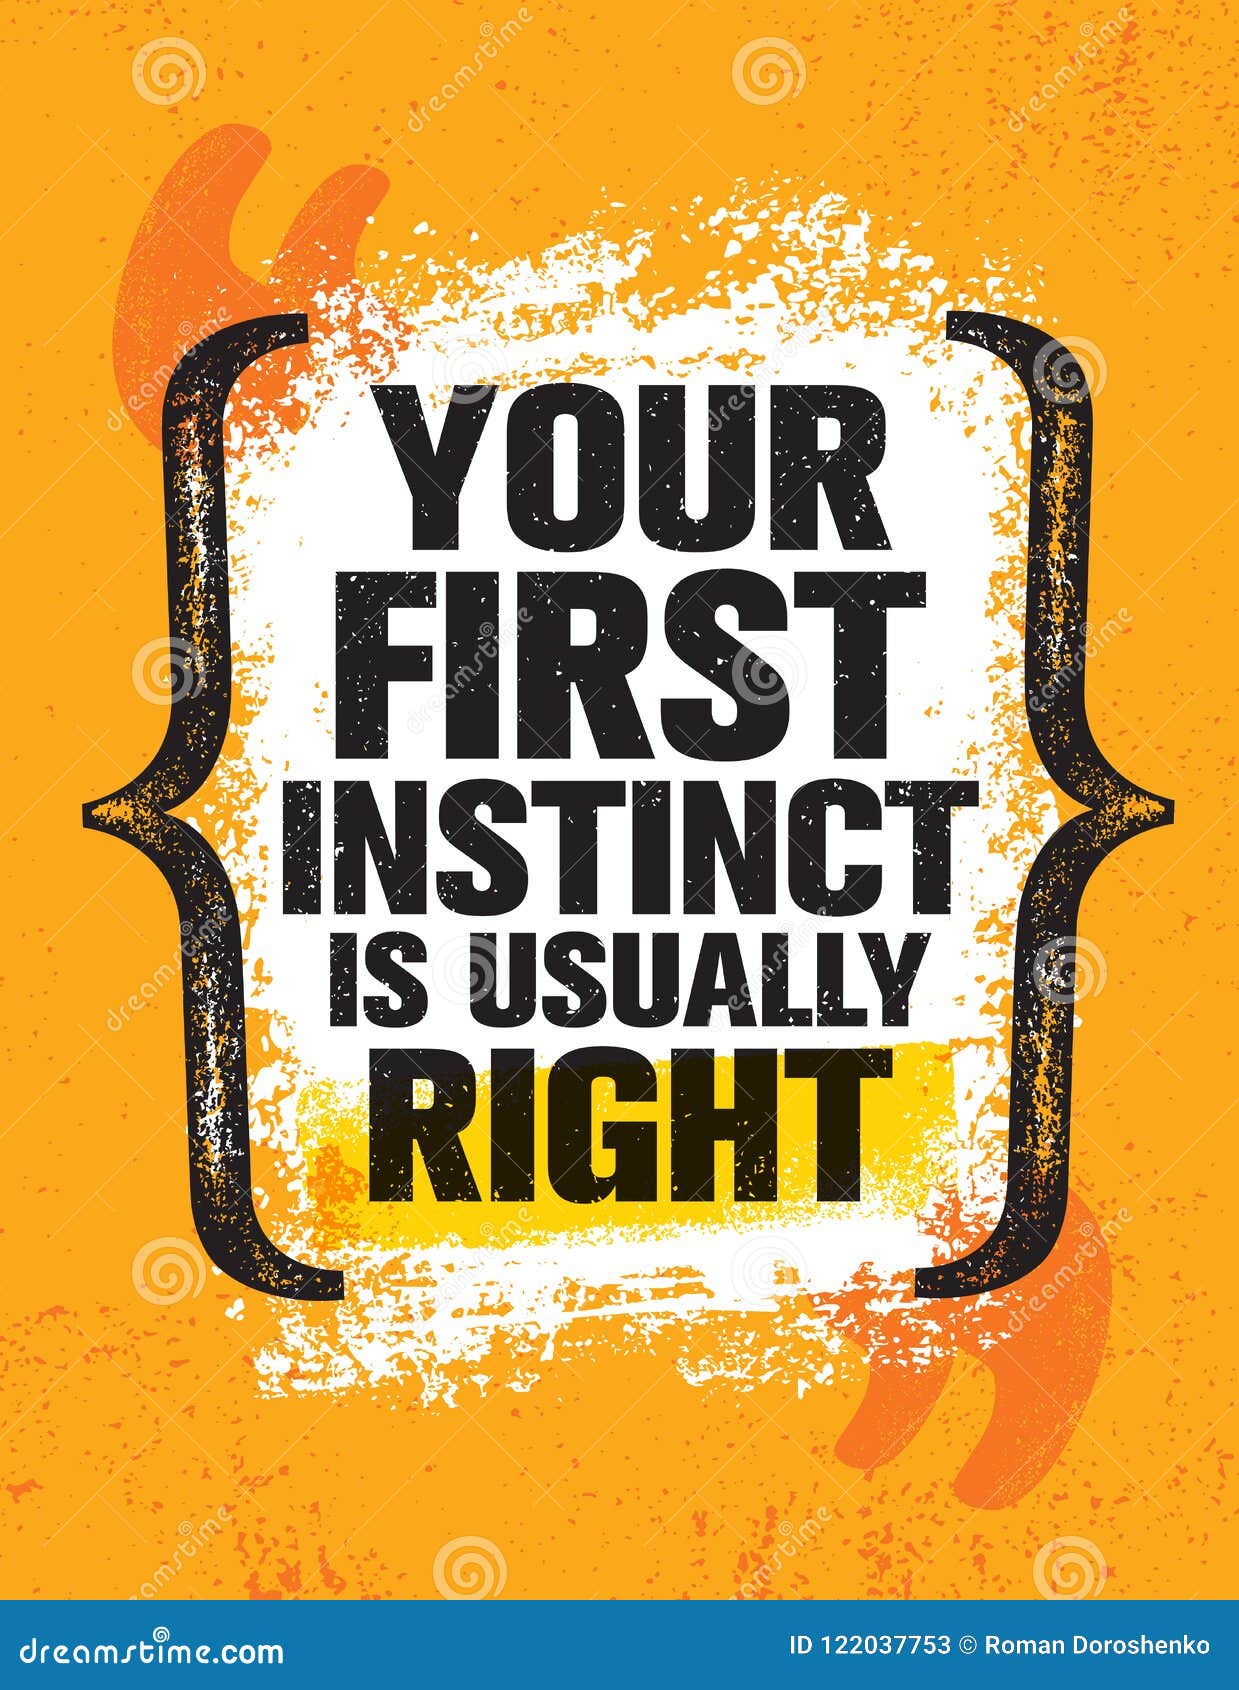 your first instinct is usually right. inspiring creative motivation quote poster template.